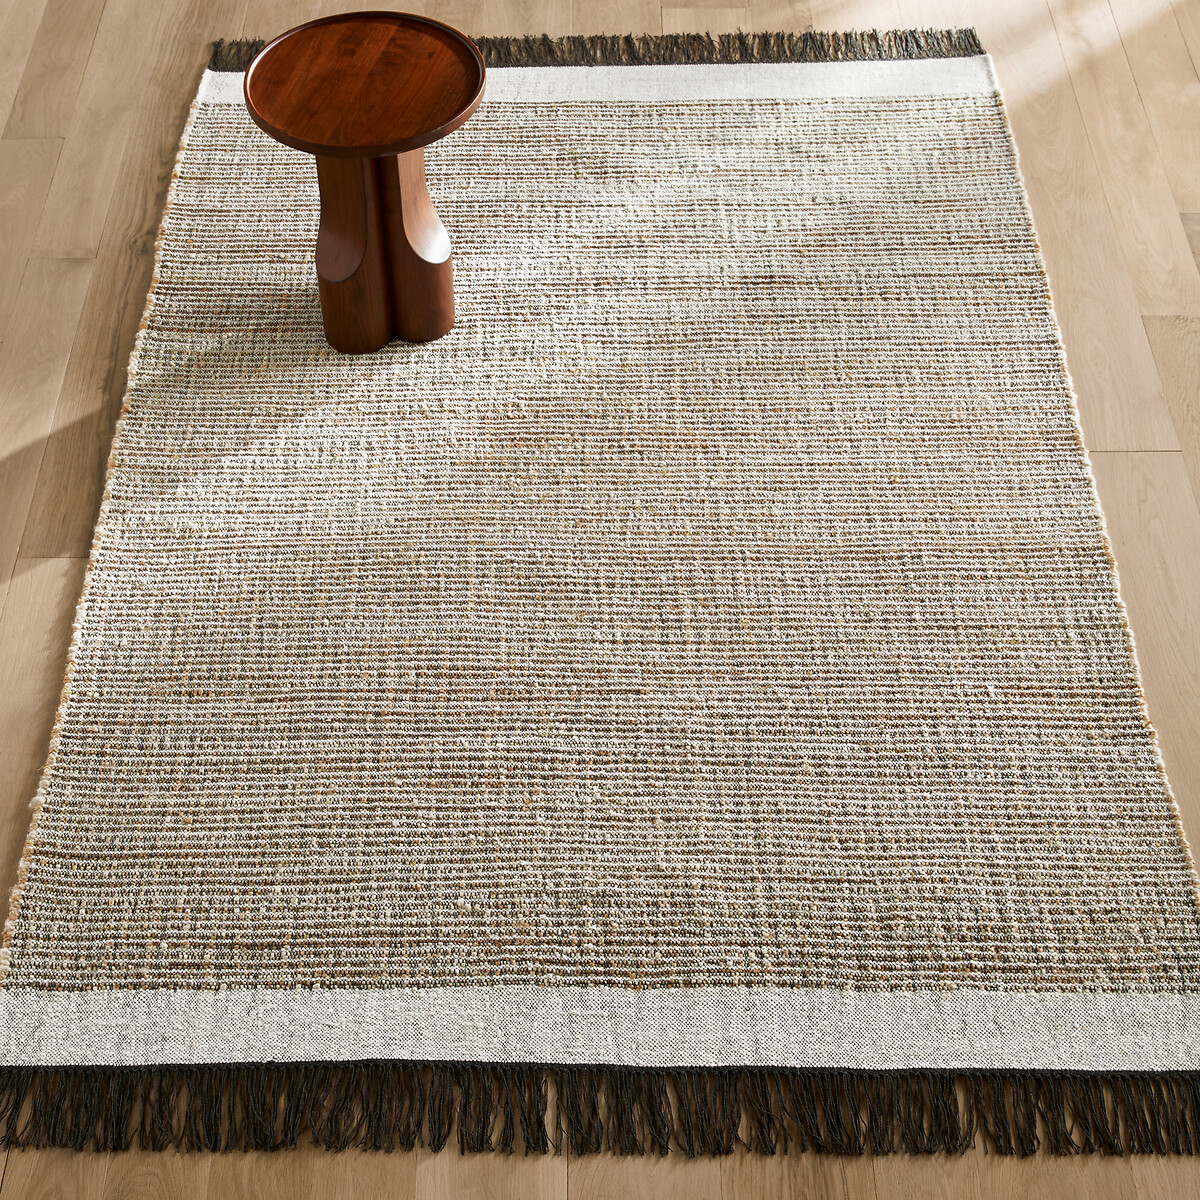 Siptah Flat Woven Jute, Wool and Cotton Rug